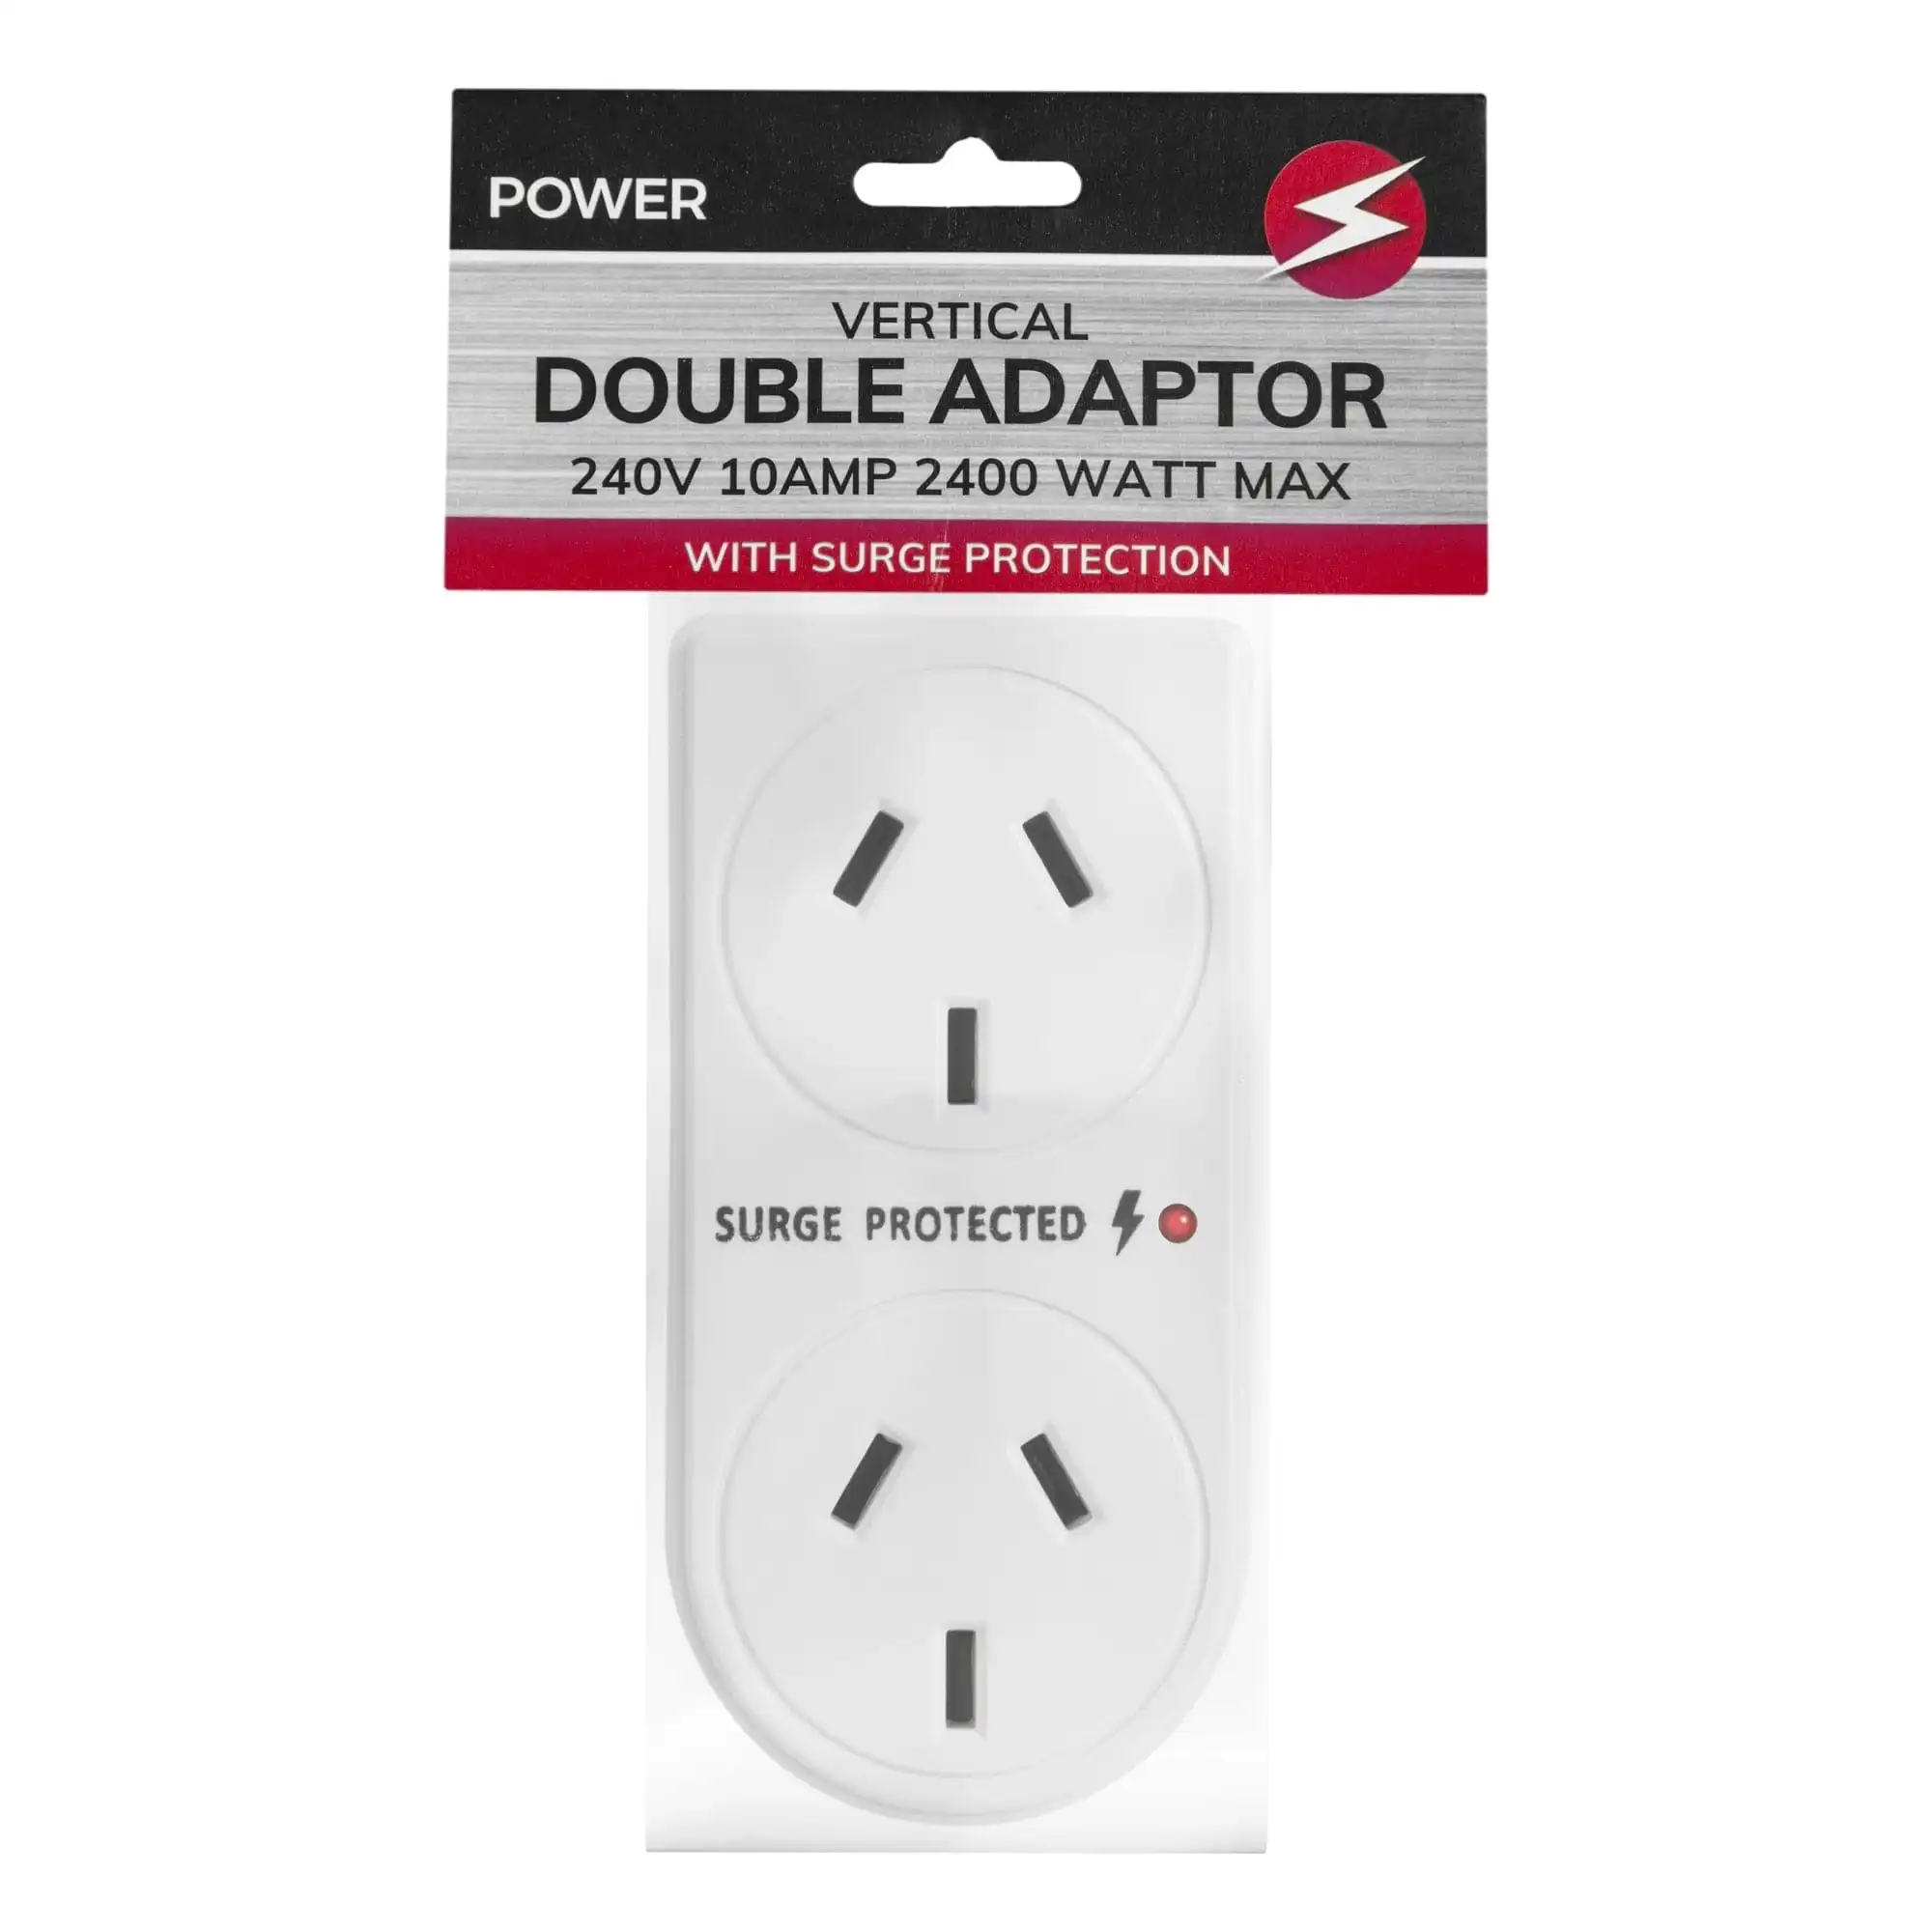 2400W Double Vertical Adapter with Surge Protection